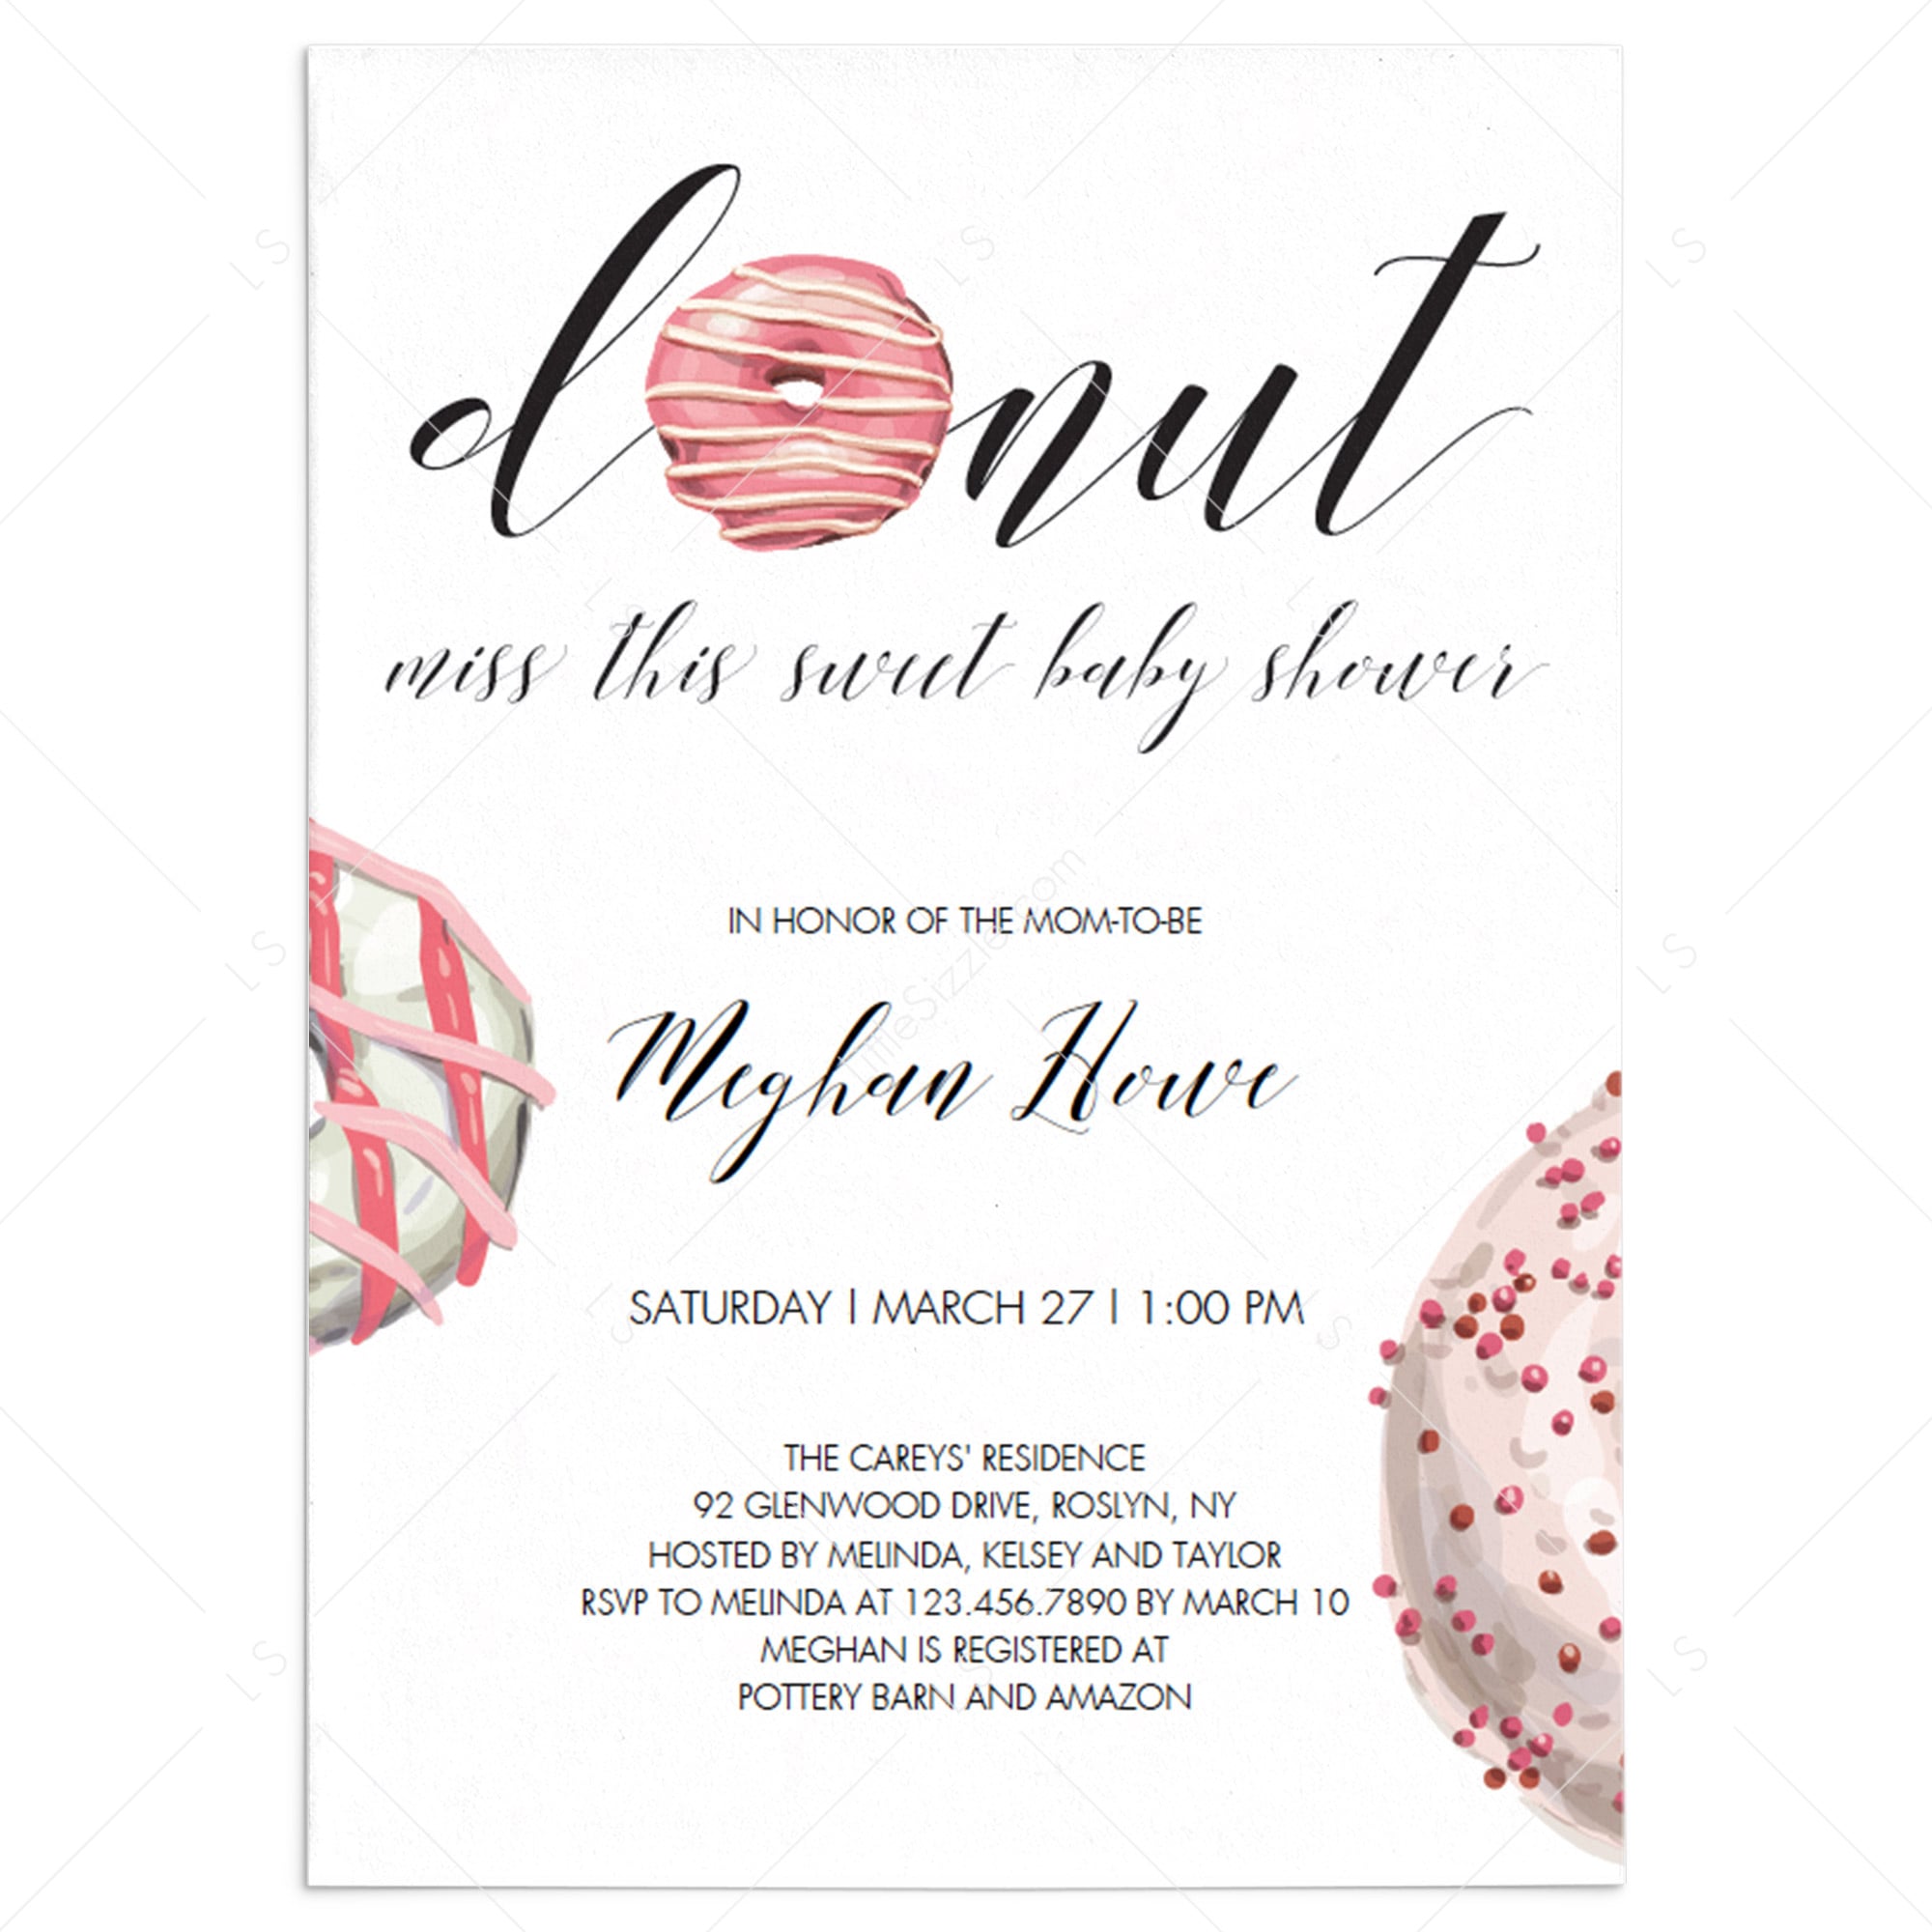 Donut baby shower invitation template by LittleSizzle